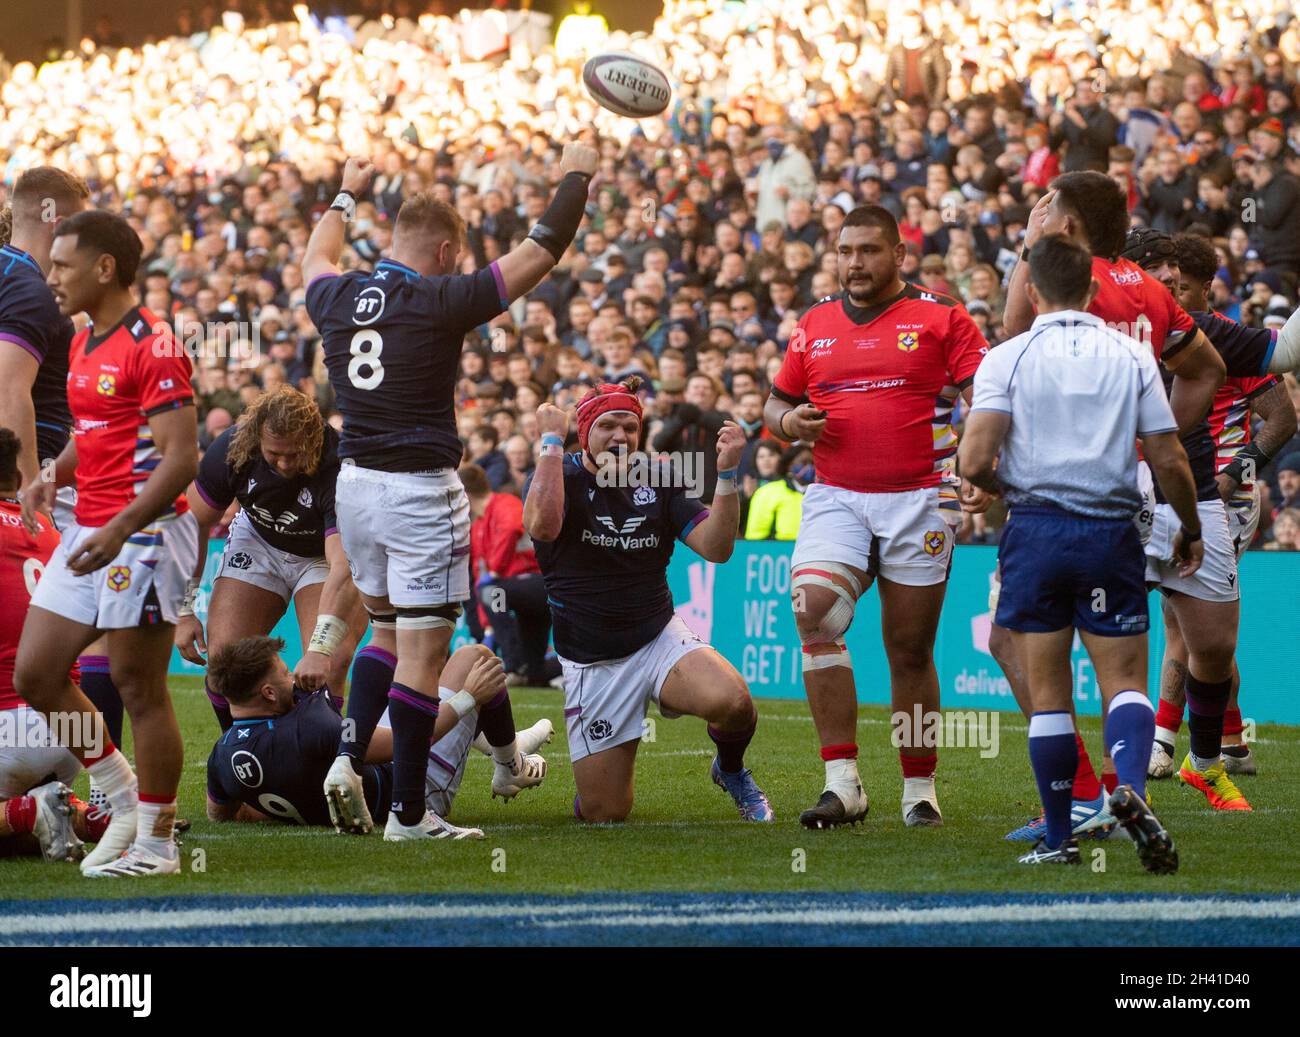 Autumn Nations Series - Scotland v, Tonga. 30th Oct, 2021. Scotland play host to Tonga in the their first match of the 2021 Autumn Nations Series at Murrayfield Stadium, Edinburgh, Scotland. UK. Pic shows: Scotland Hooker, George Turner, celebrates after scoring his try during the 2nd half as Scotland thrash Tonga 60-14. Credit: Ian Jacobs/Alamy Live News Stock Photo